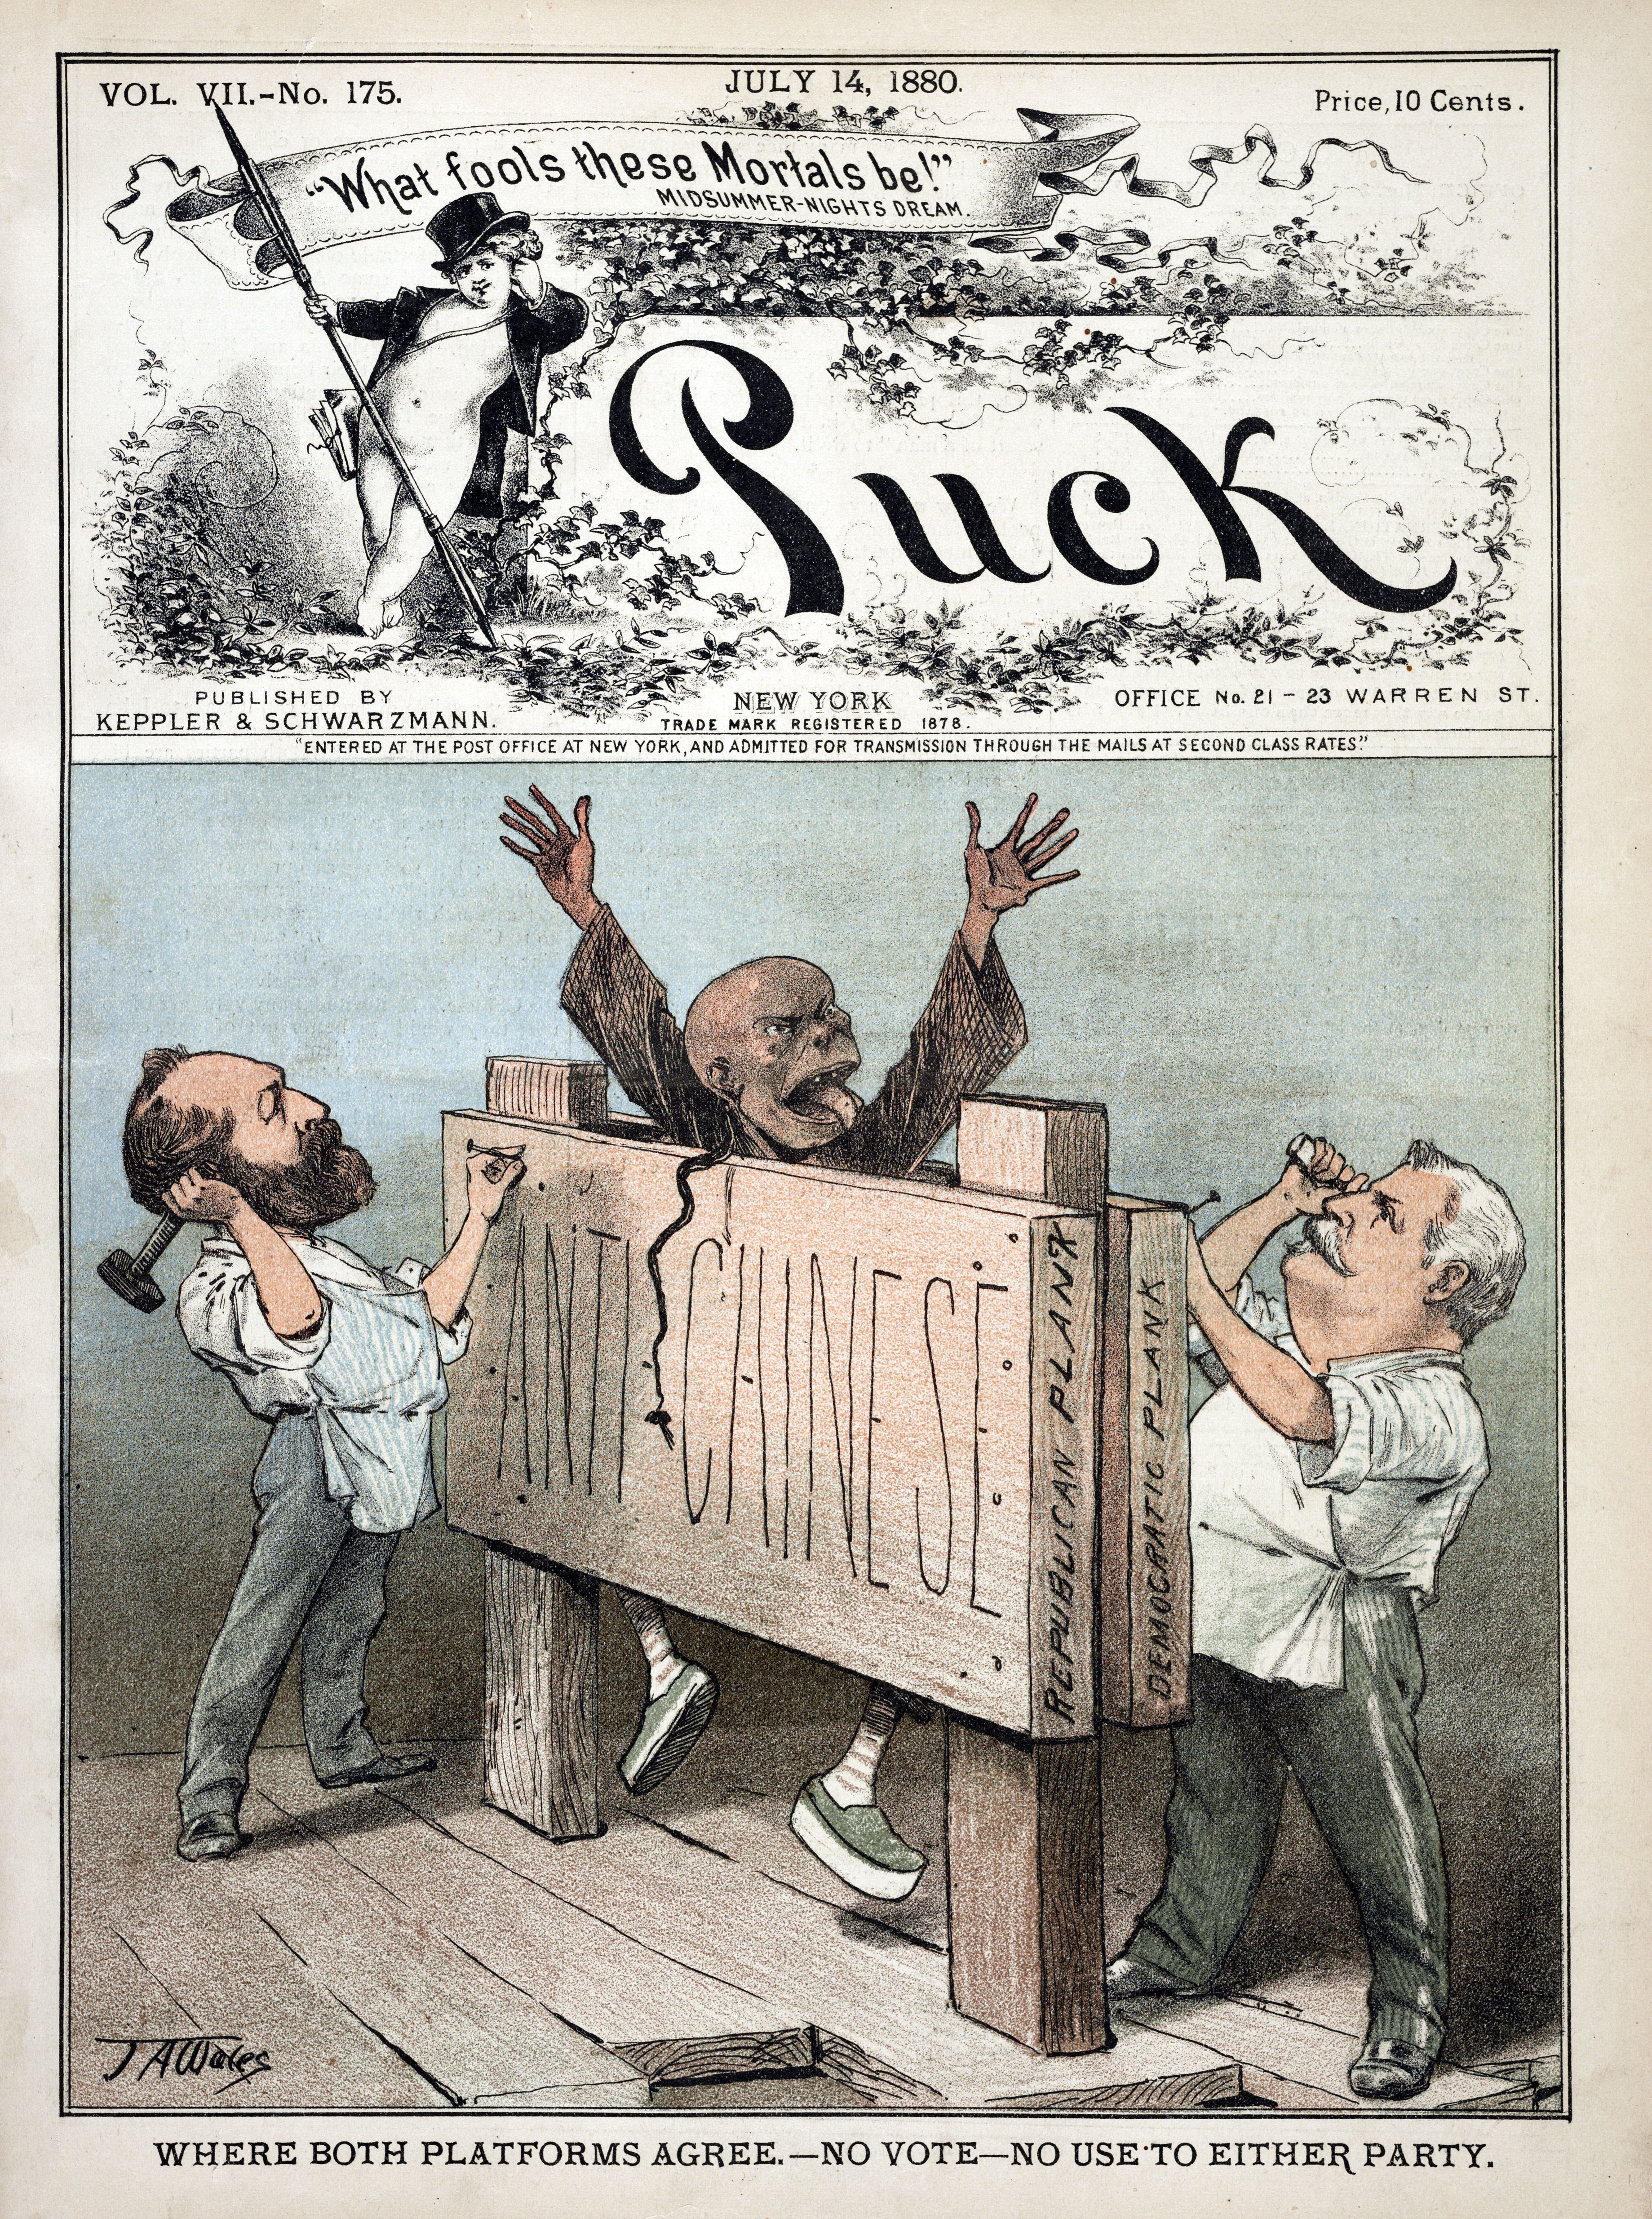 Cartoon showing two white men nailing a caricatured Chinese man between two plans that read "anti-Chinese"